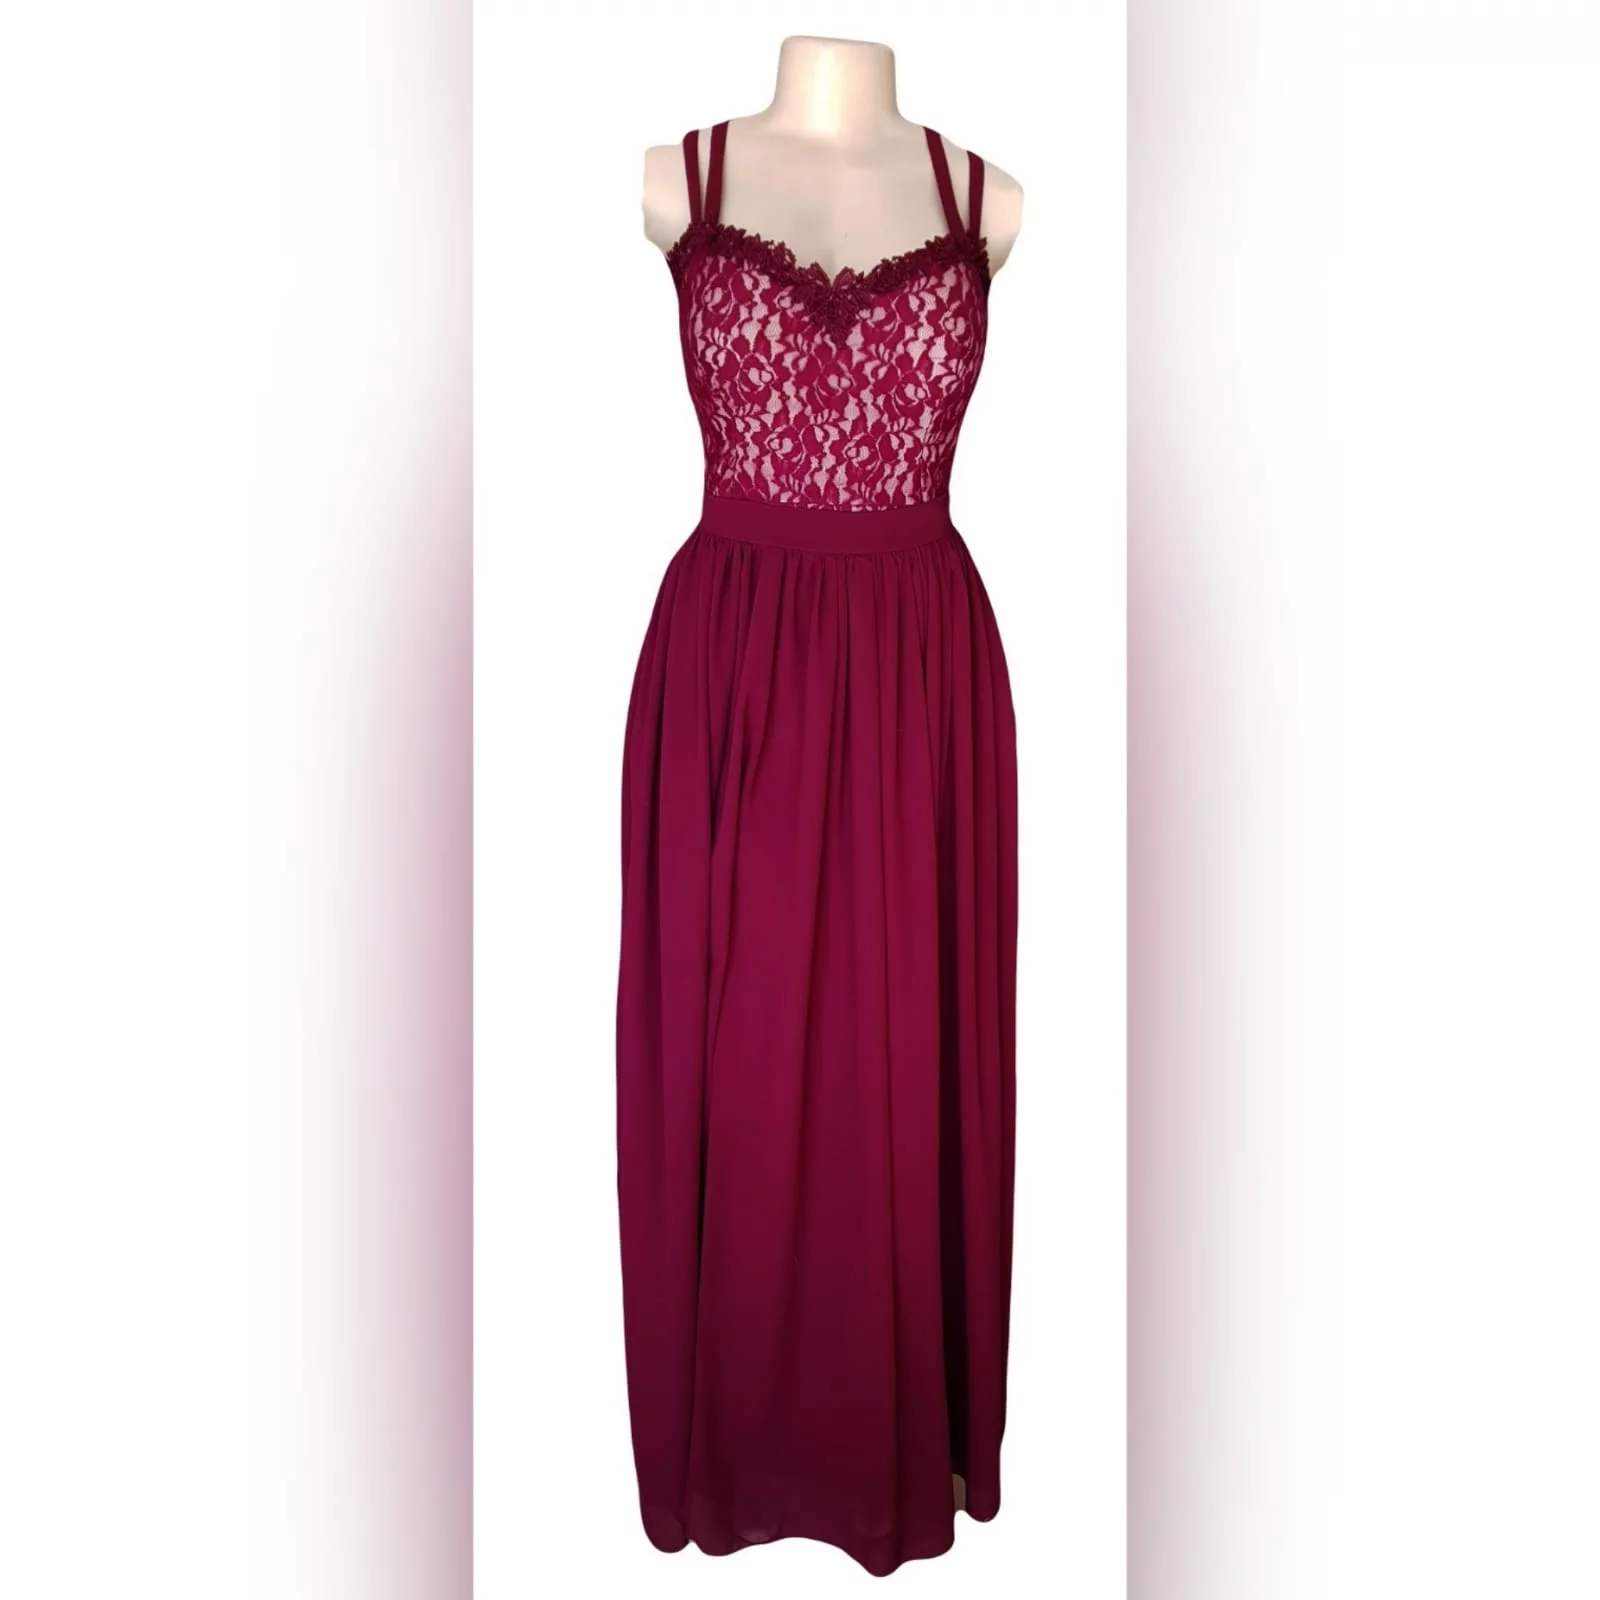 Versatile 2 piece maroon dress 6 <blockquote>to shine your brightest light is to be who you truly are. Roy t. Bennett</blockquote> a versatile 2 piece maroon dress. A lace short leg bodysuit with a sweetheart neckline and shoulder straps. With a removable flowy chiffon skirt with a slit.